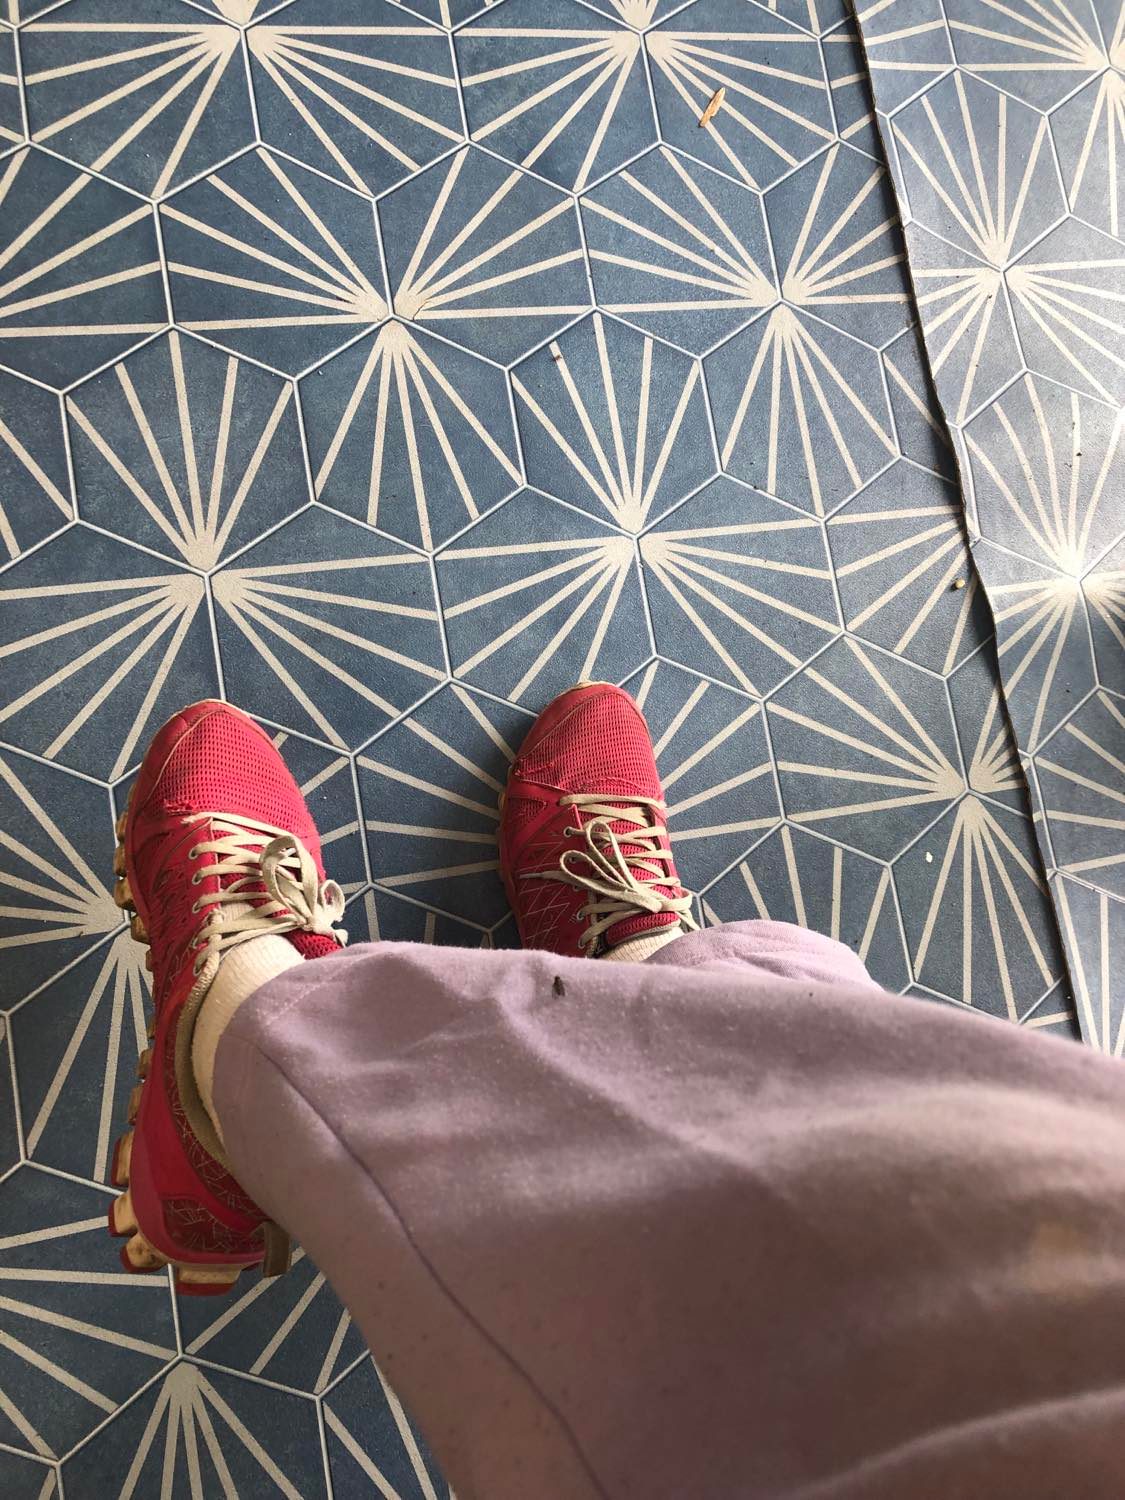 Kabutroid's legs being crossed, wearing pink sweat pants and pink shoes, with a black and white line-patterned tile floor beneath, and a little housefly resting on her right leg